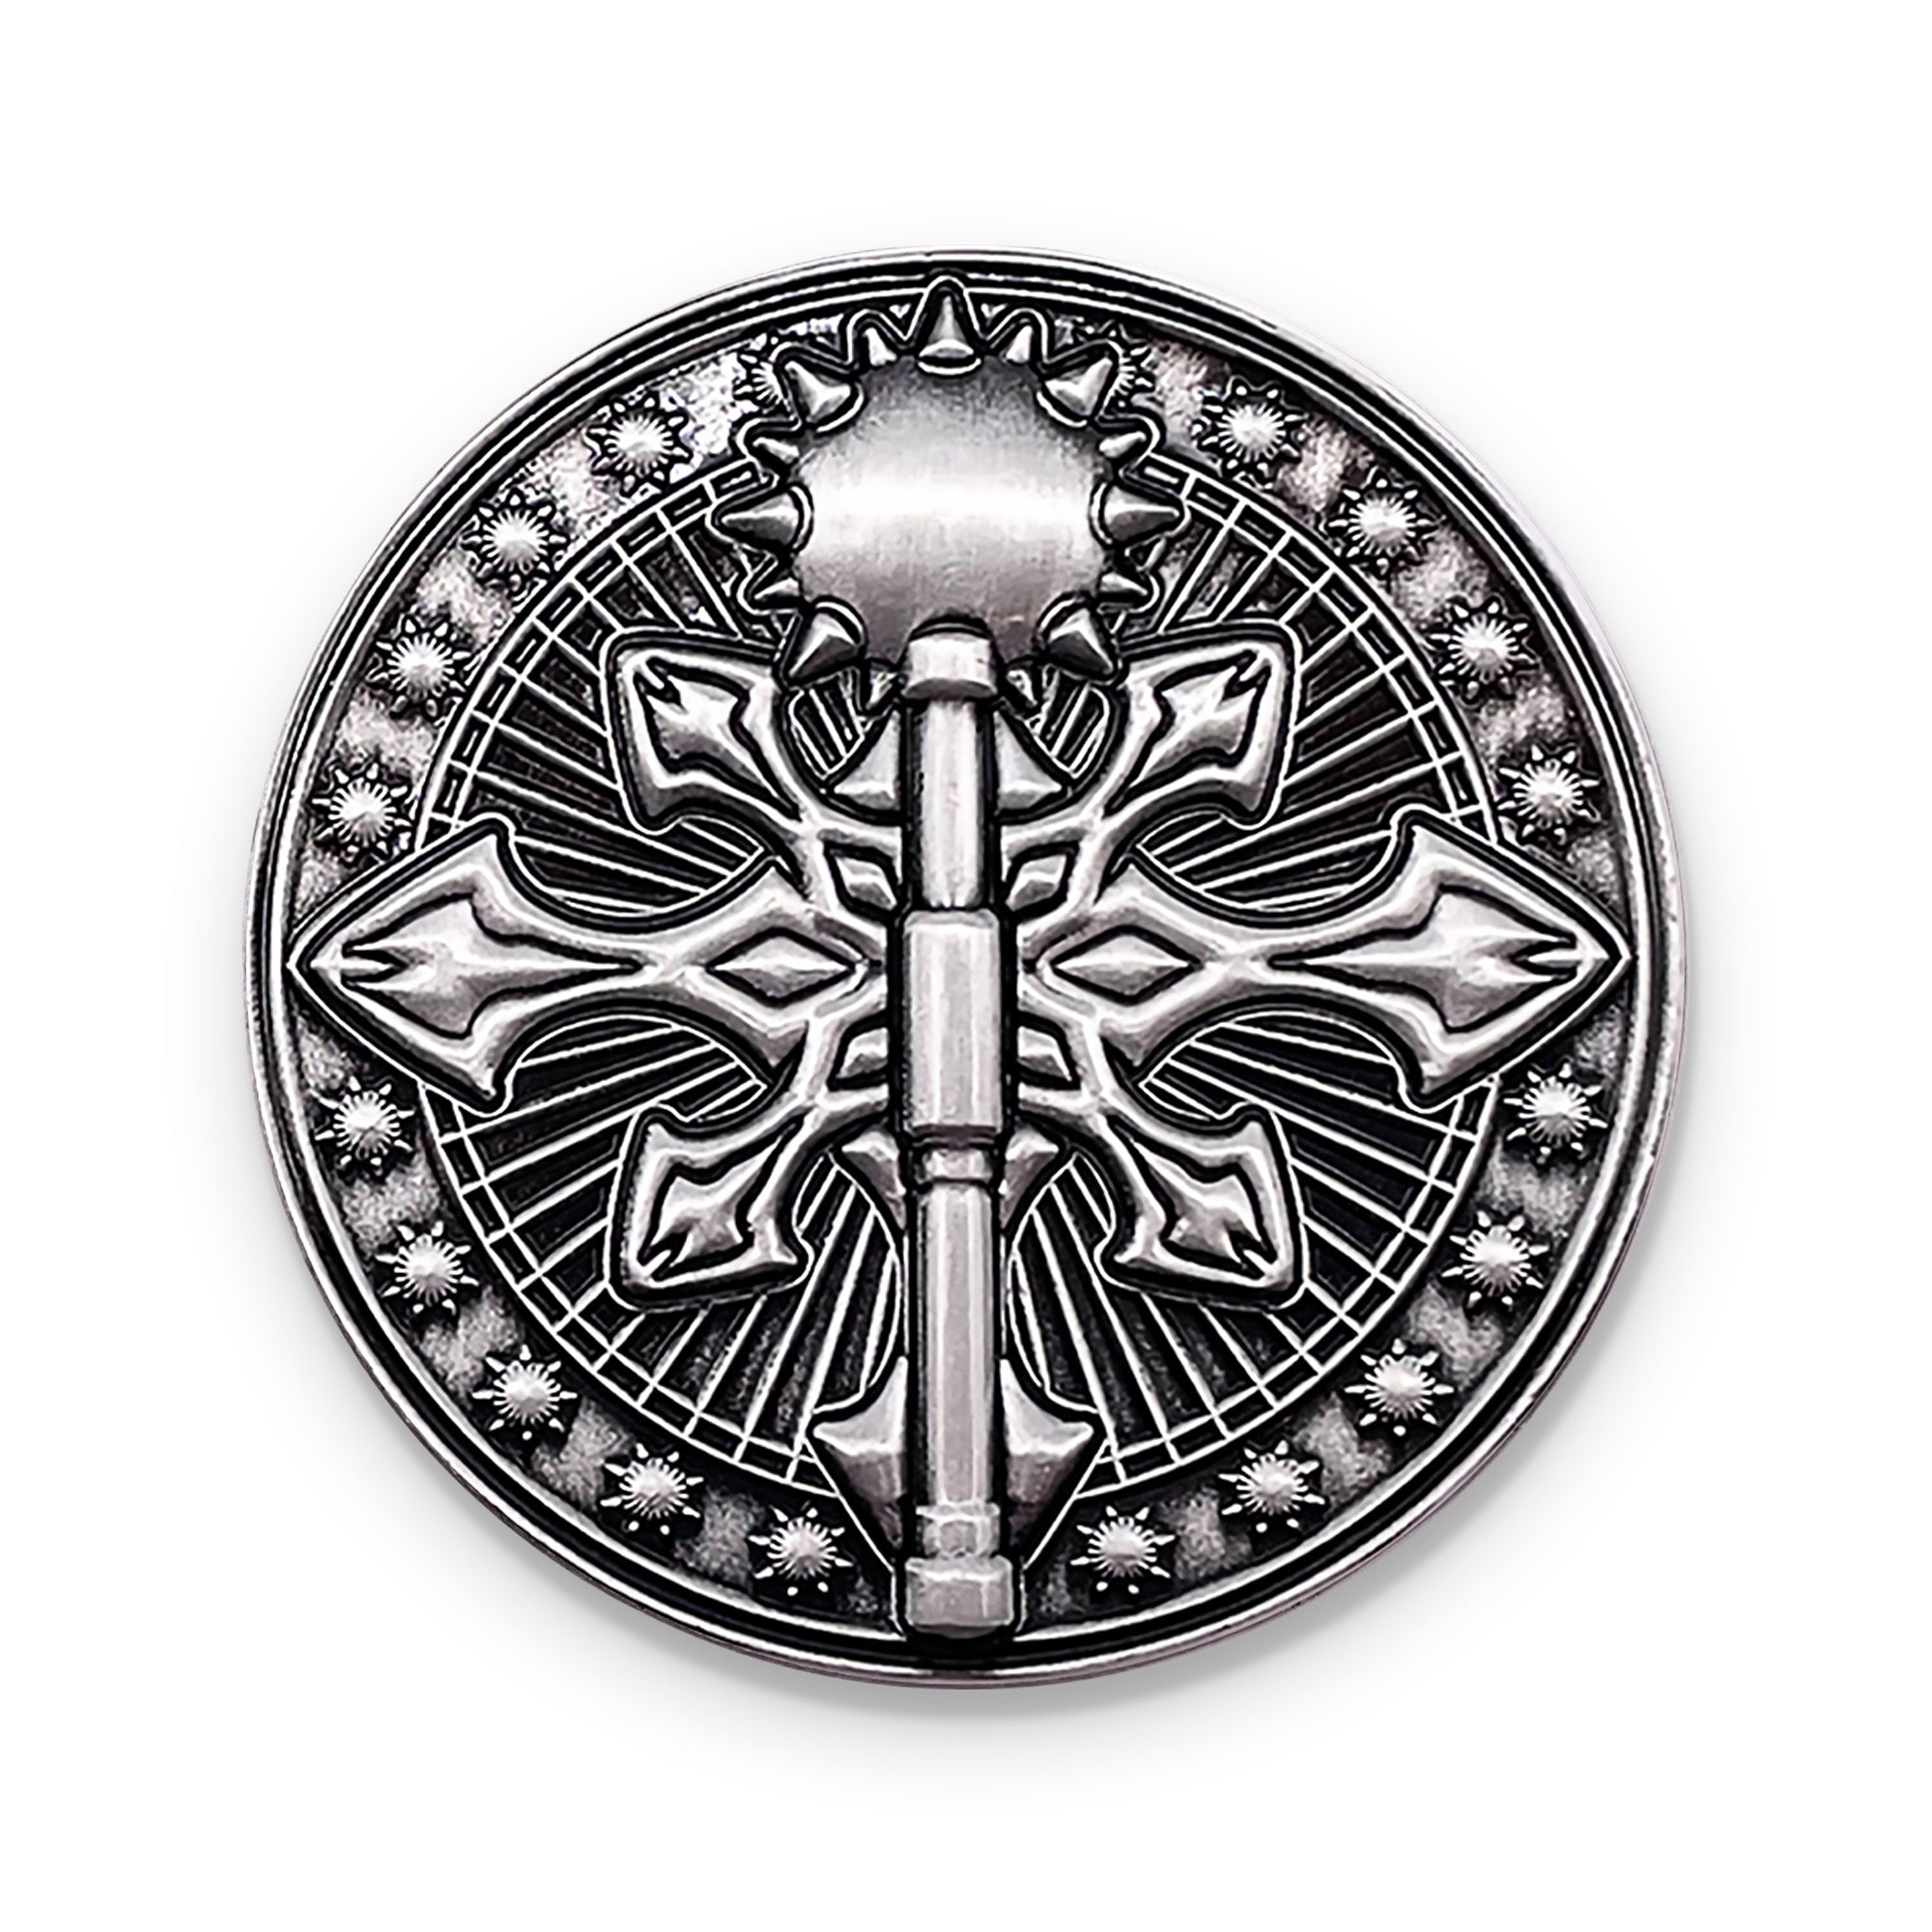 Cleric - Single 45mm Profession Coin